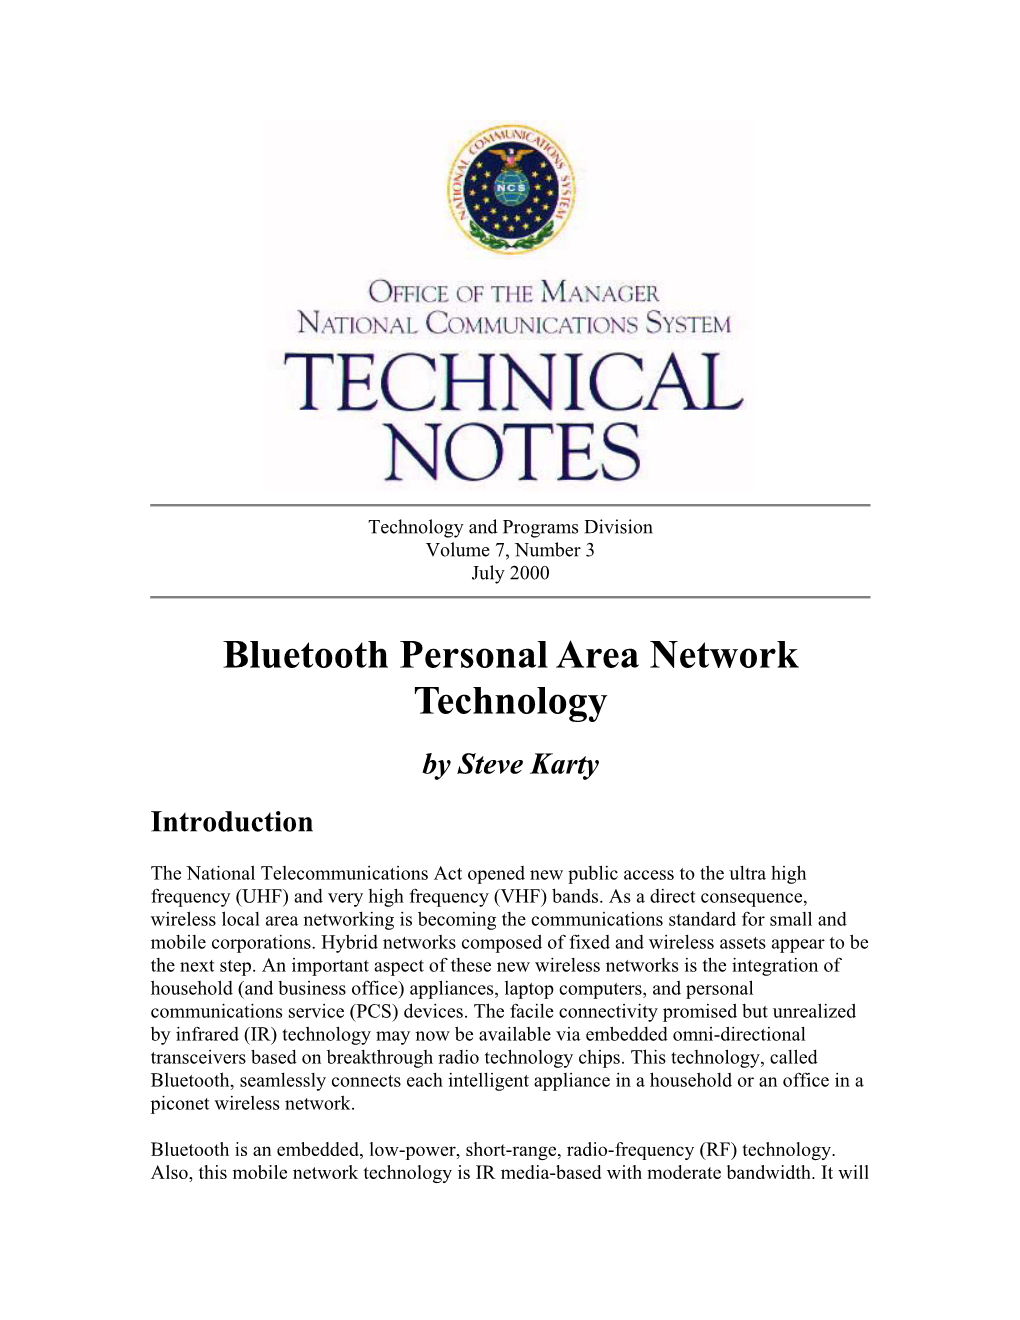 Bluetooth Personal Area Network Technology by Steve Karty Introduction